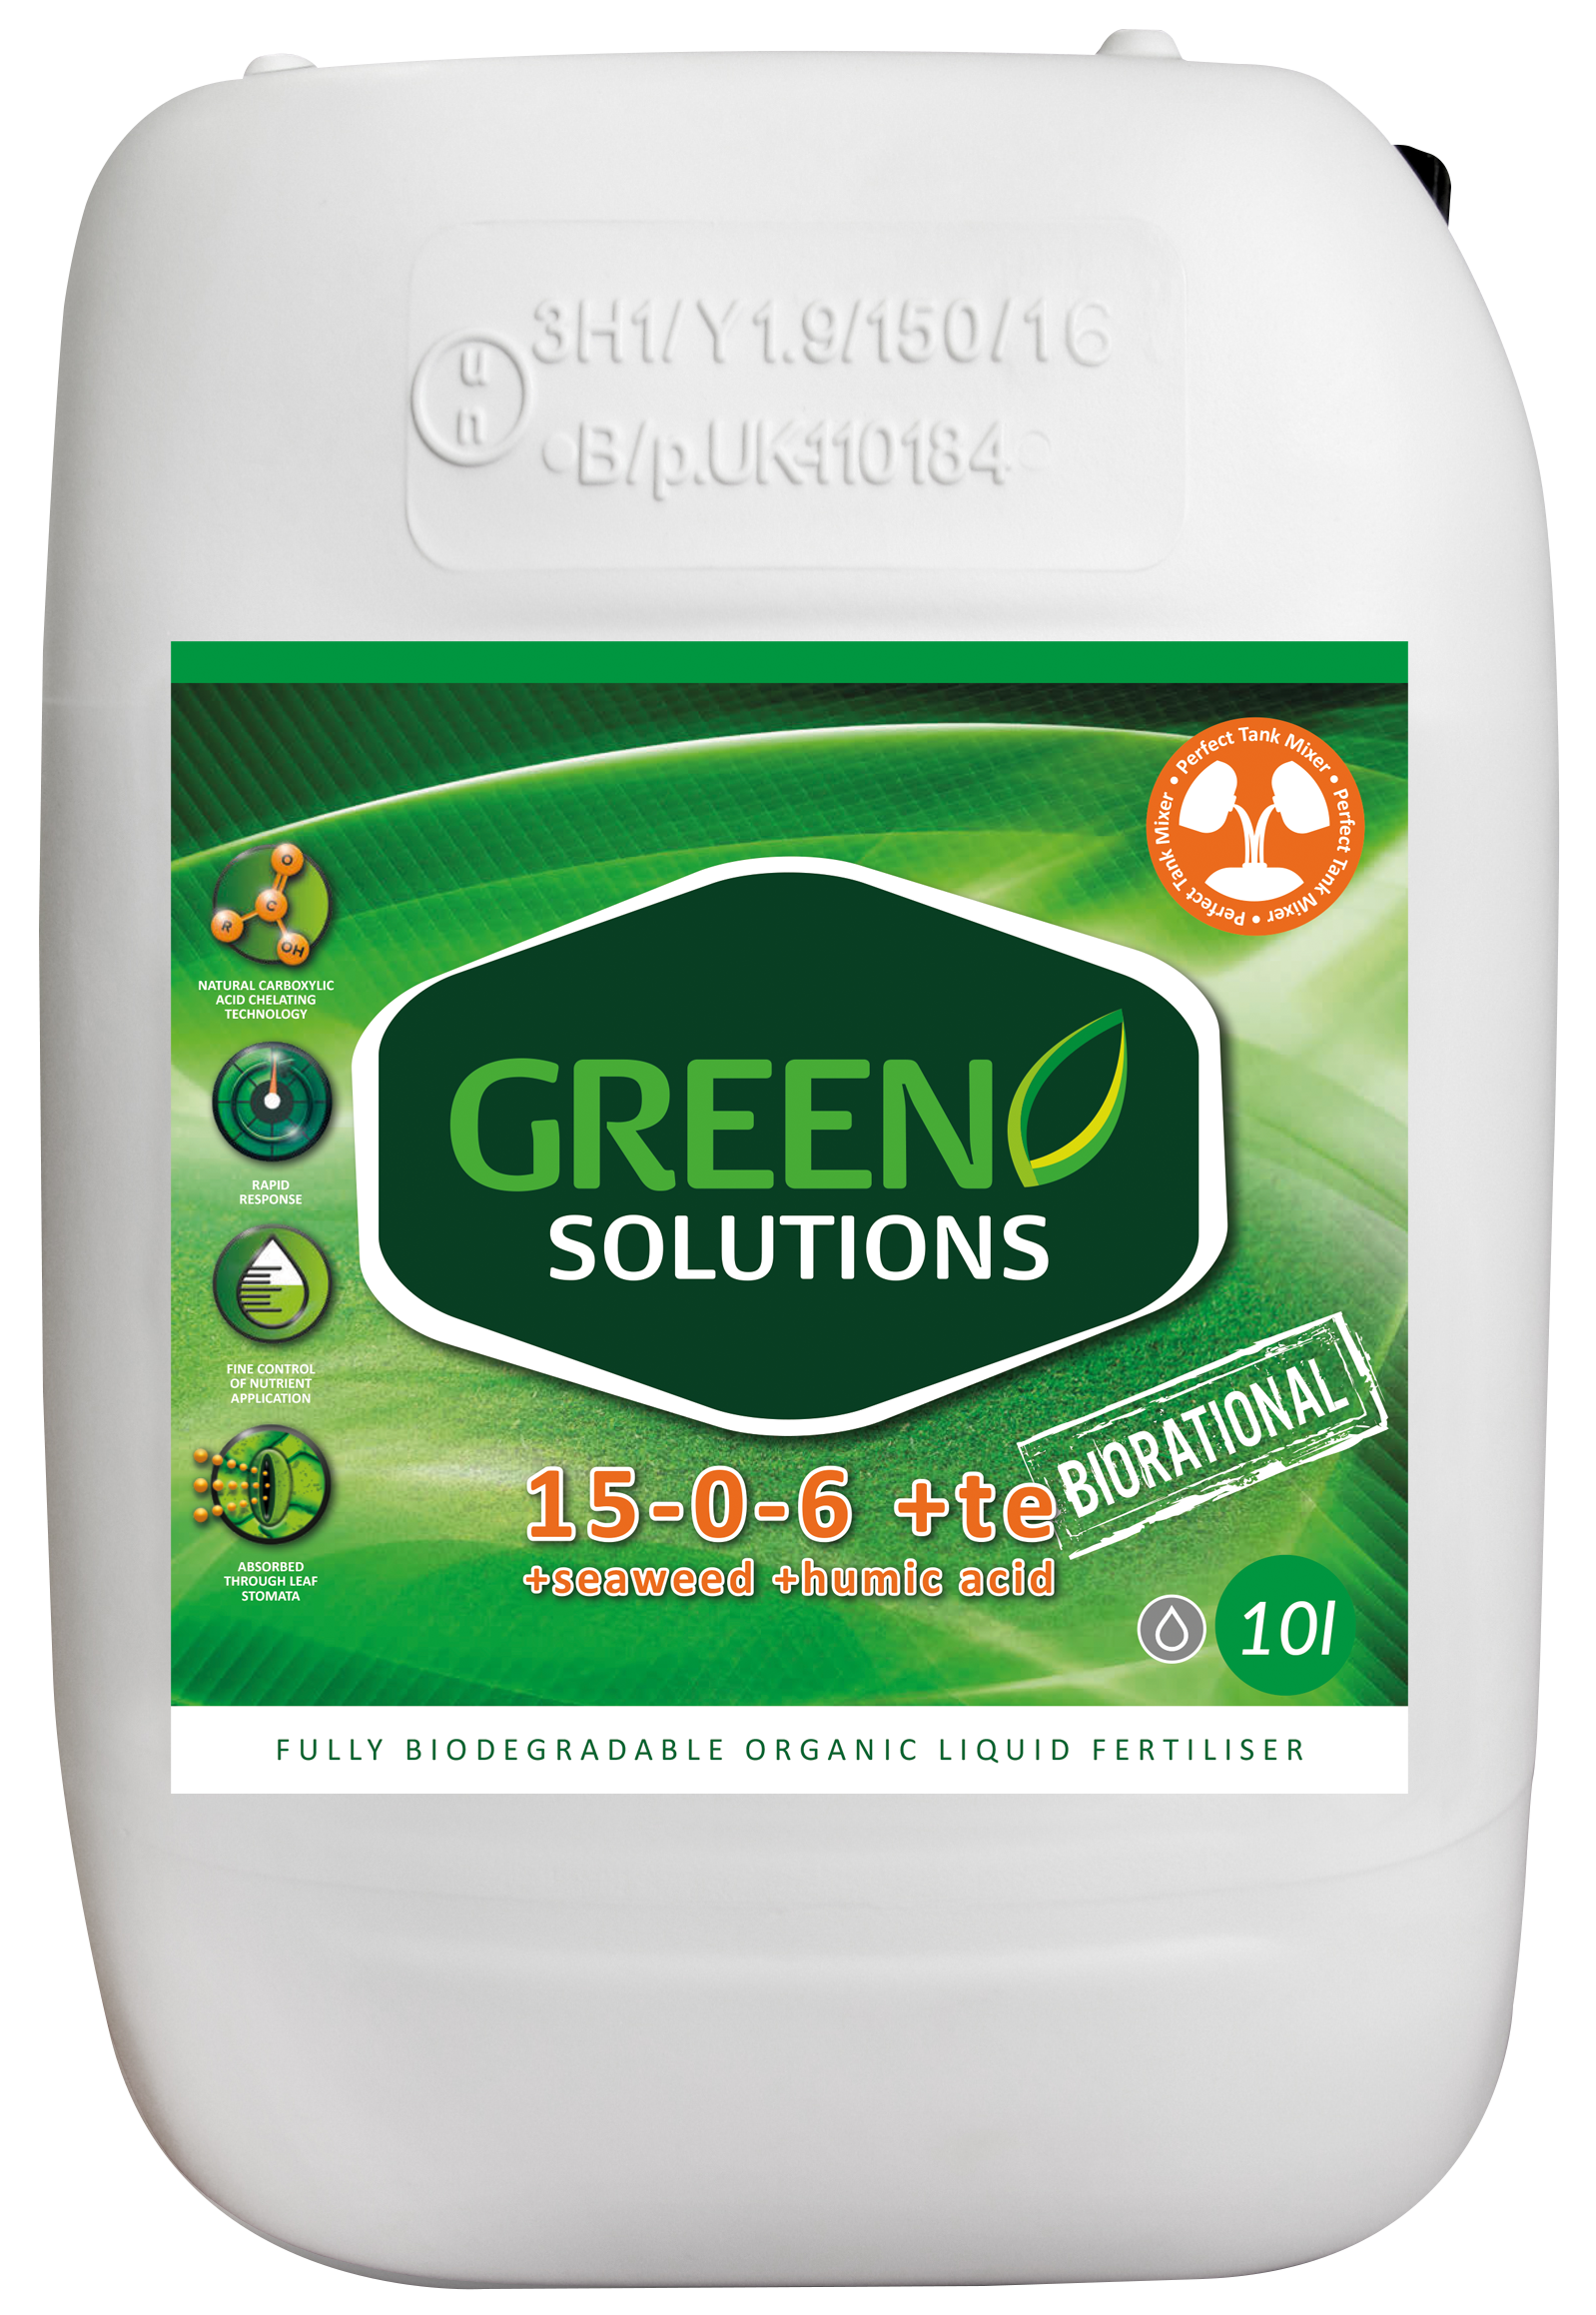 Green Solutions 15-0-6 With Seaweed, Humic Acid & Trace Elements 10L